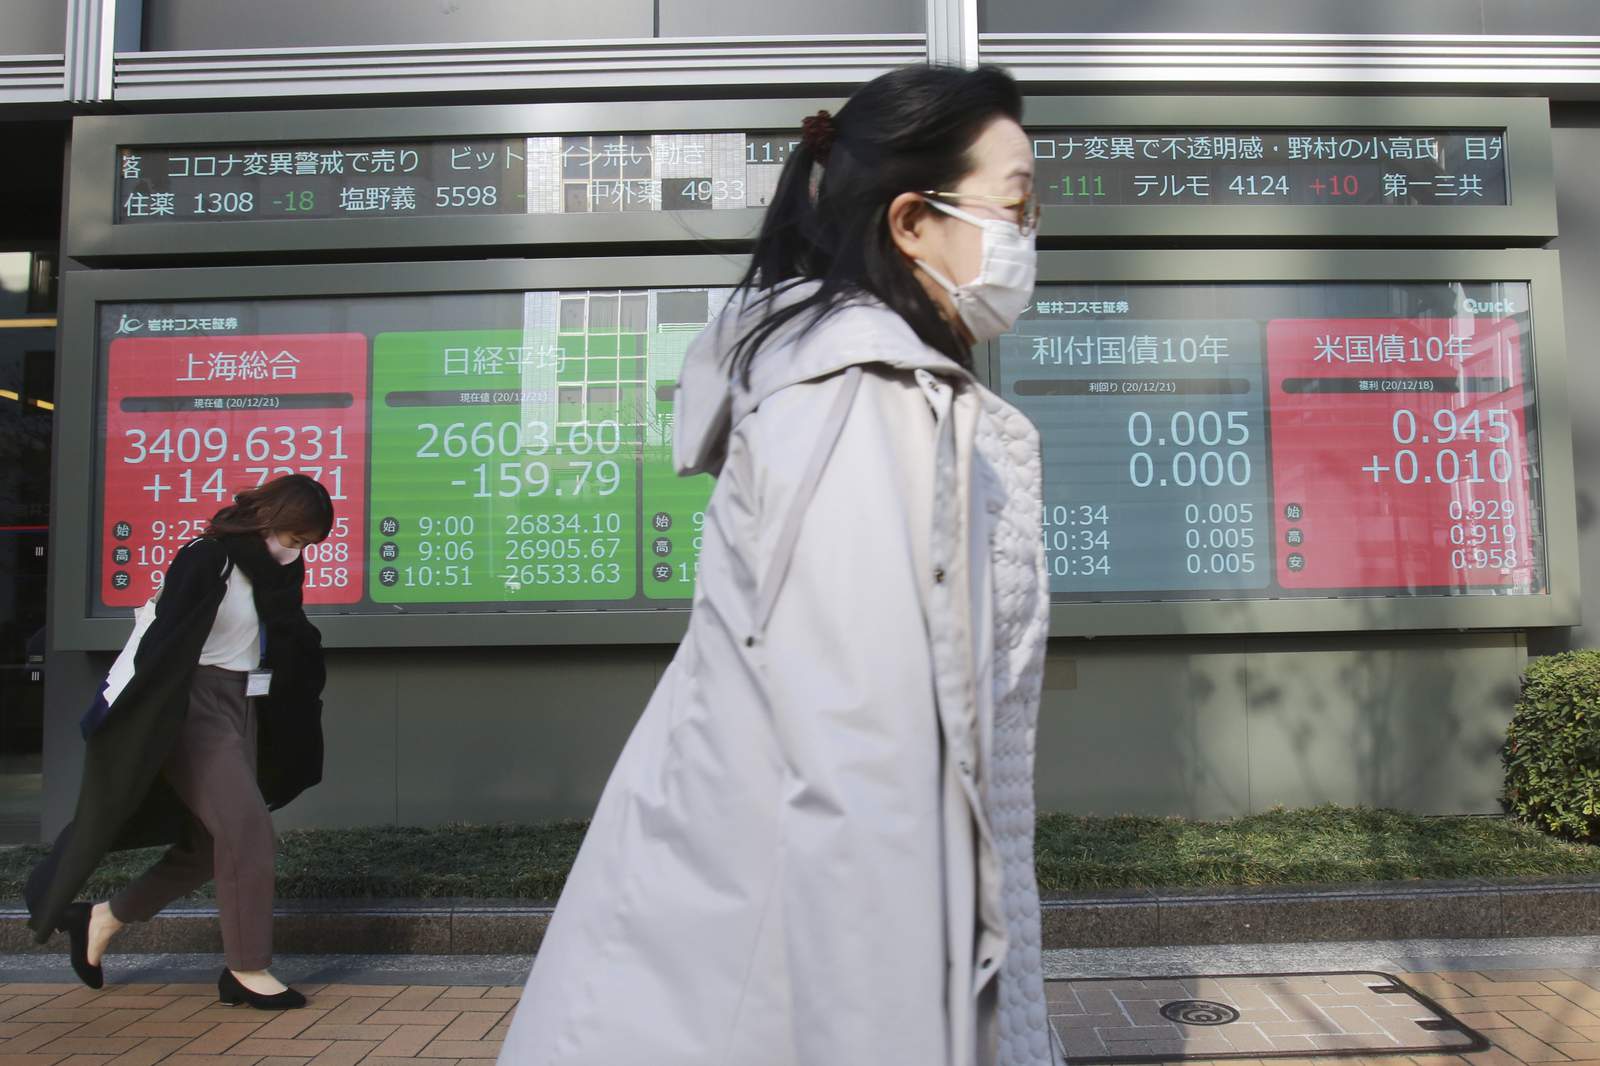 Asian shares extend losses on worries about spread of virus